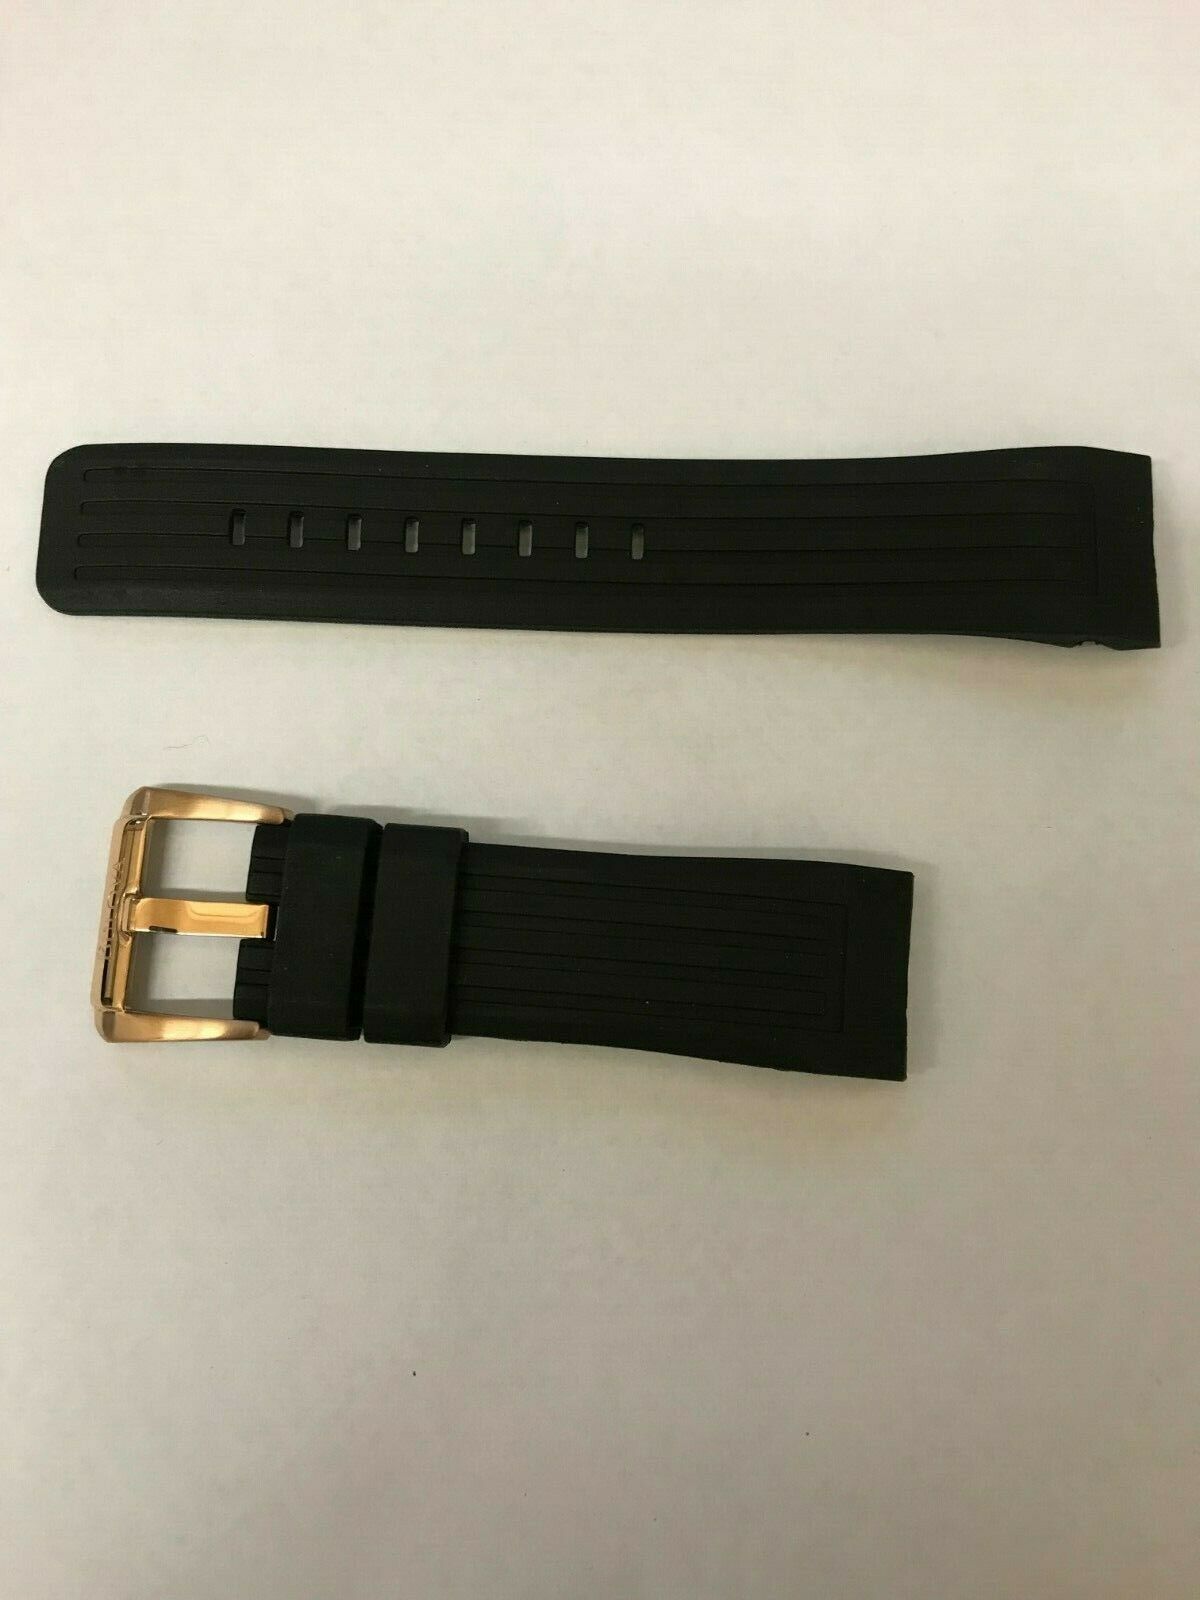 Bulova Men's 98B152 Black Rubber Band Watch Strap Rose Gold Band Replacement